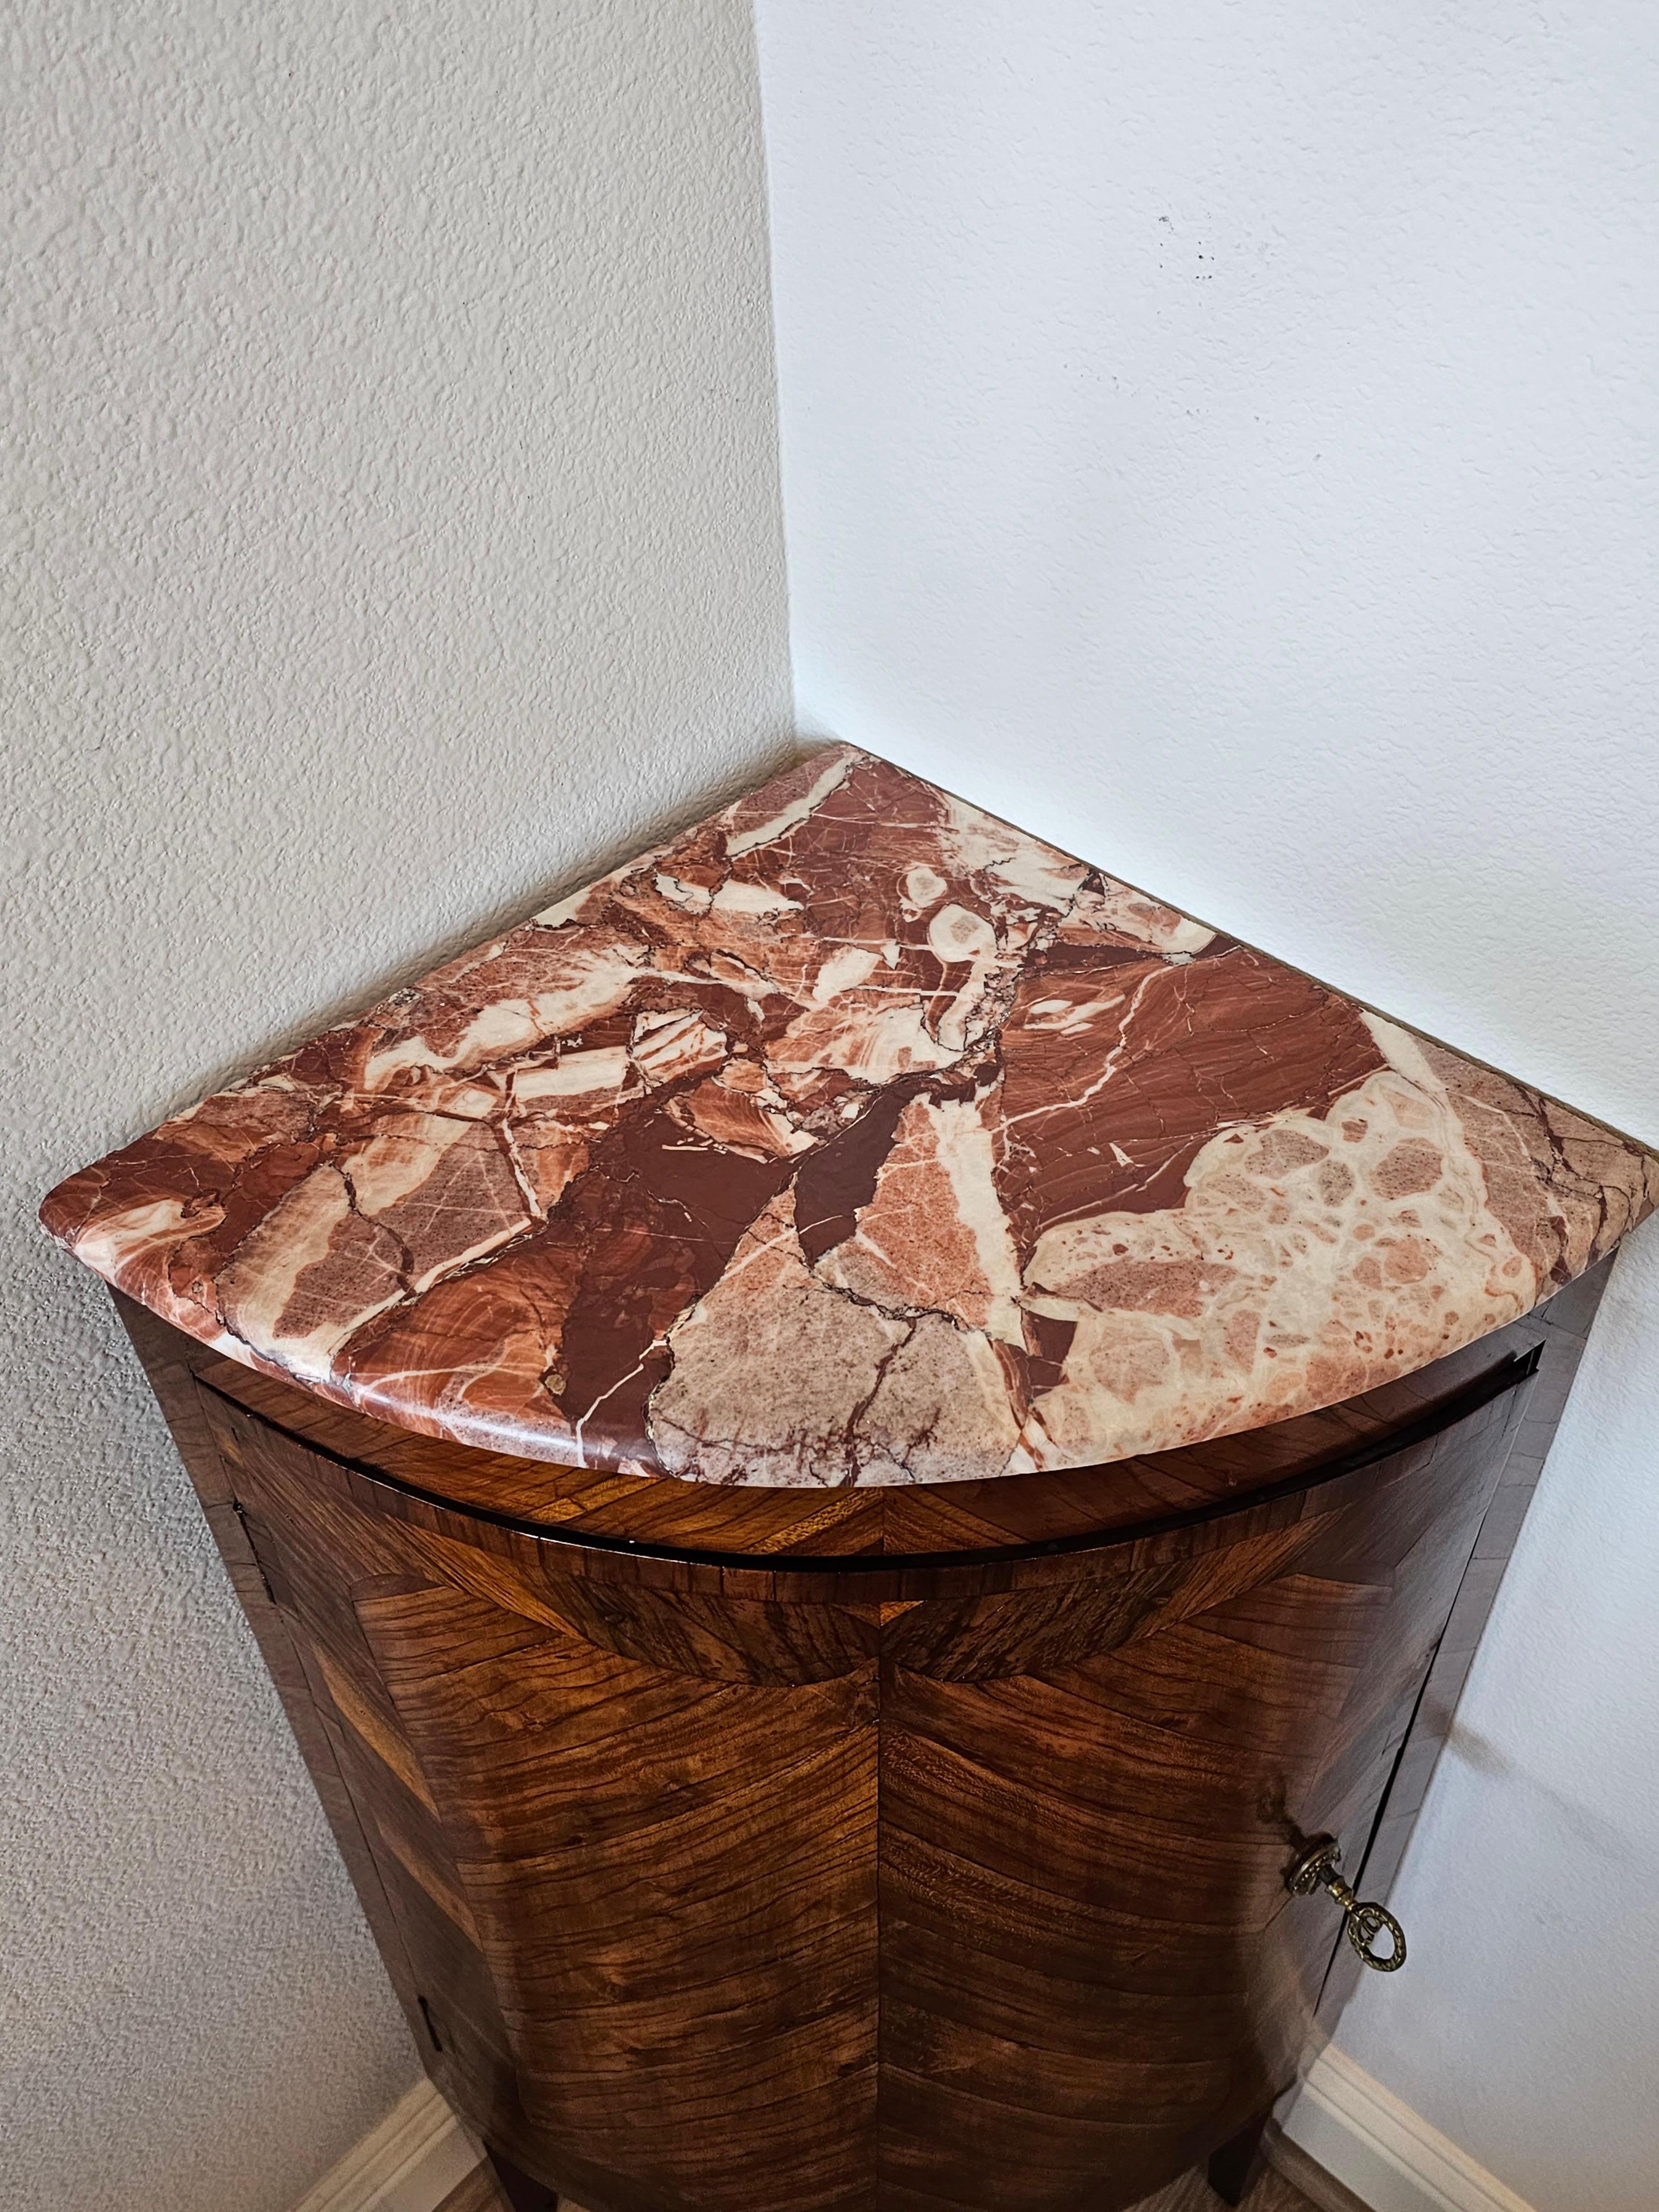 19th Century Italian Matched Kingwood Tulipwood Marble Top Corner Cabinet  In Good Condition For Sale In Forney, TX